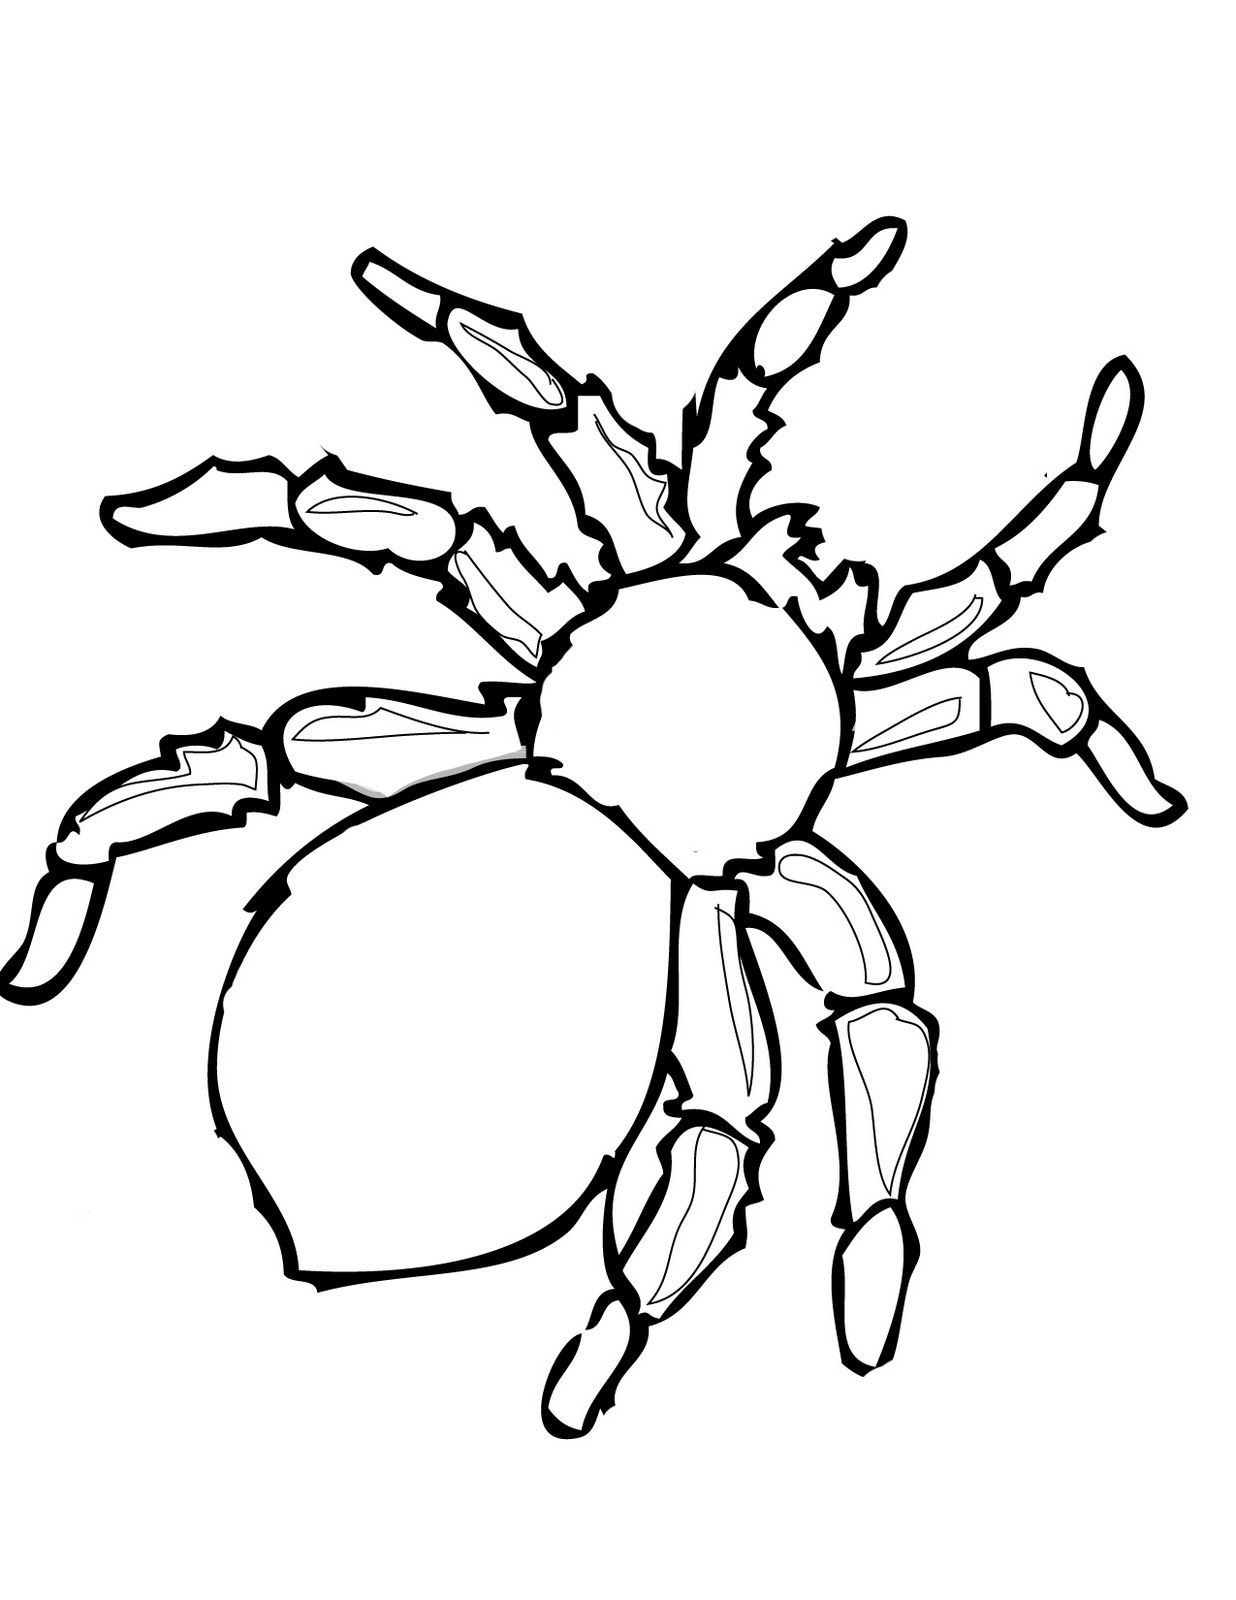 Printable Halloween Spider Coloring Pages_92184